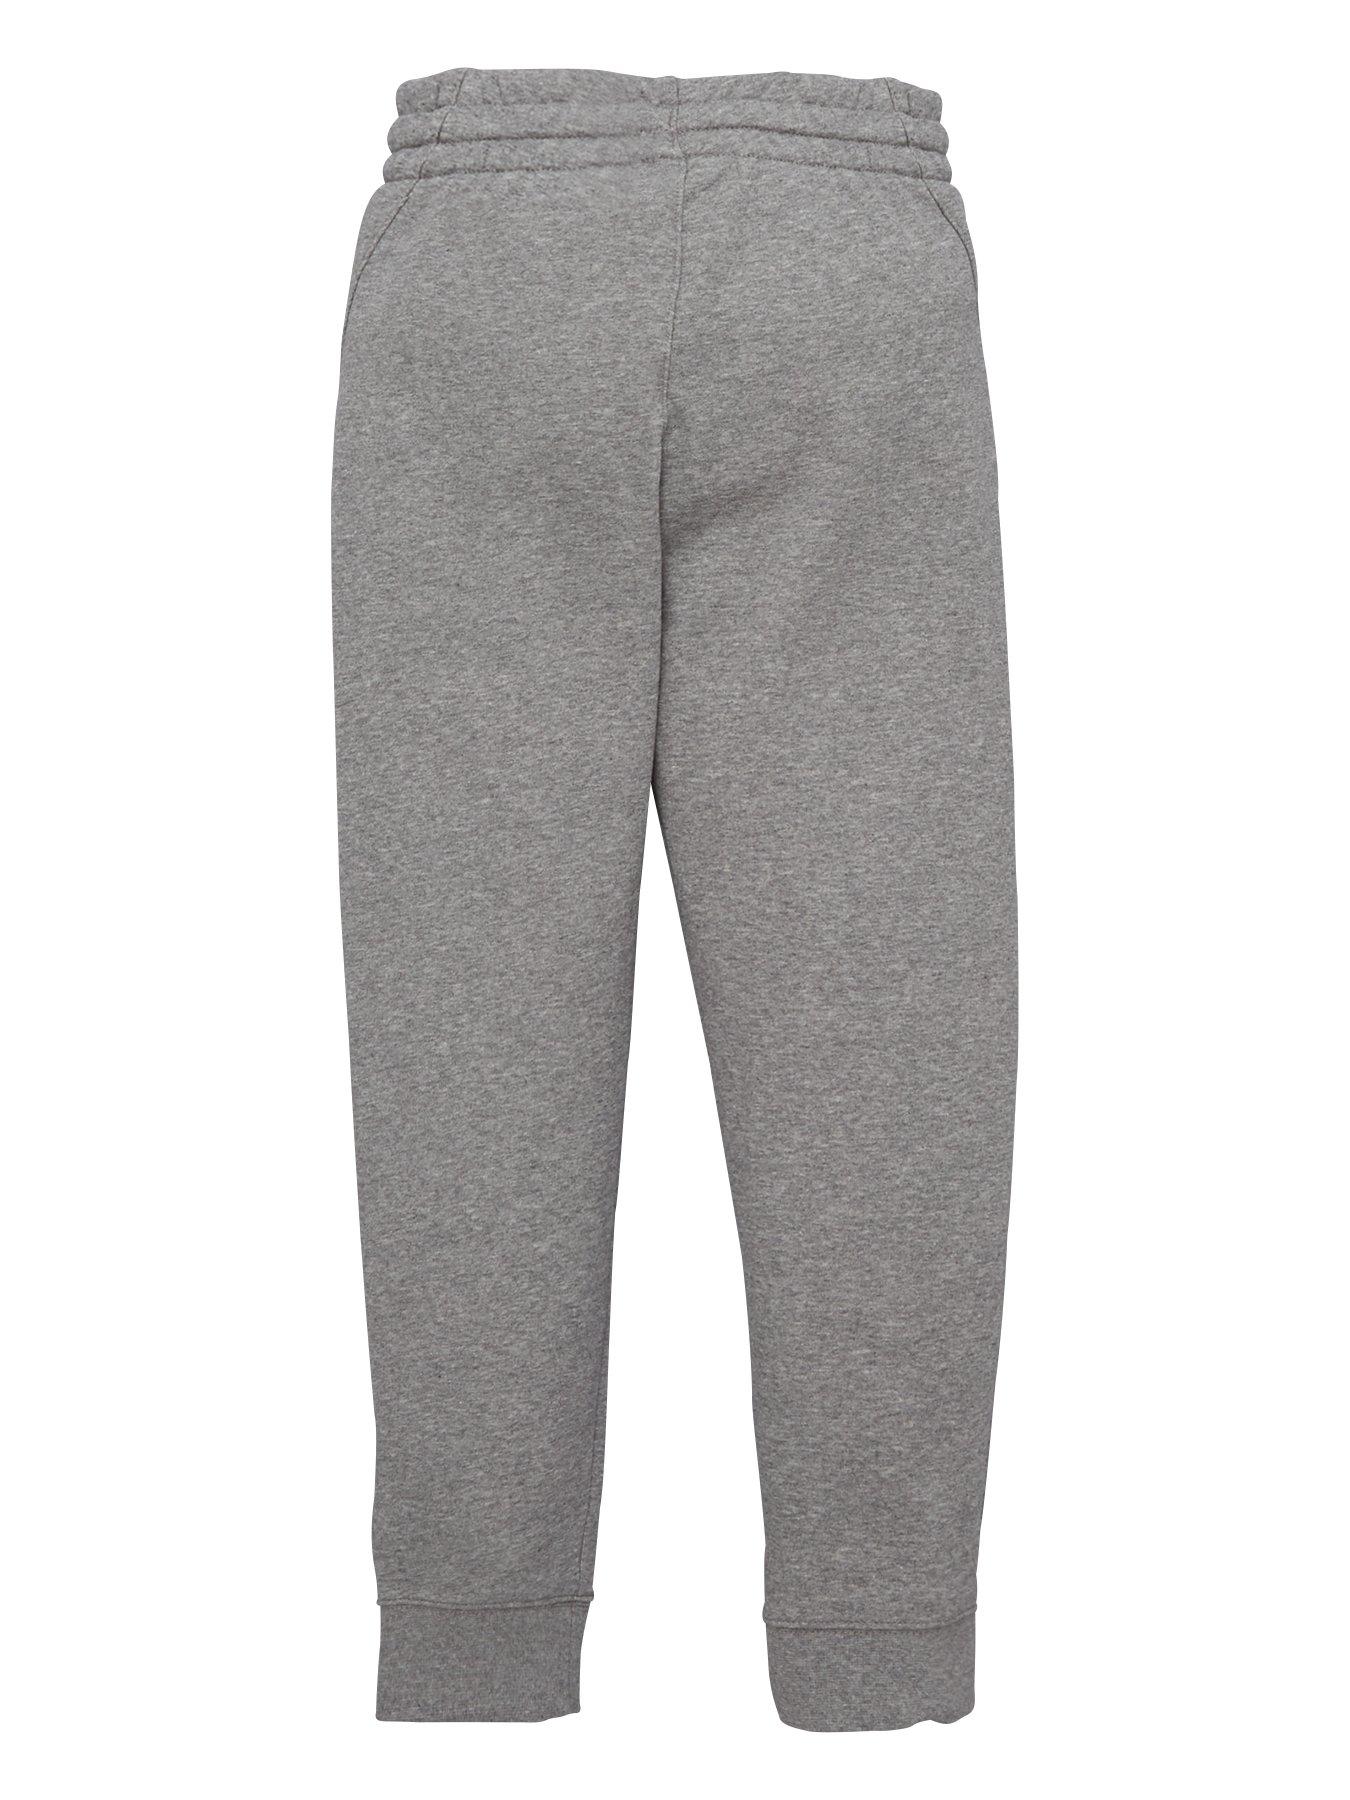  Boys NSW Club French Terry Jogger Pant - Grey